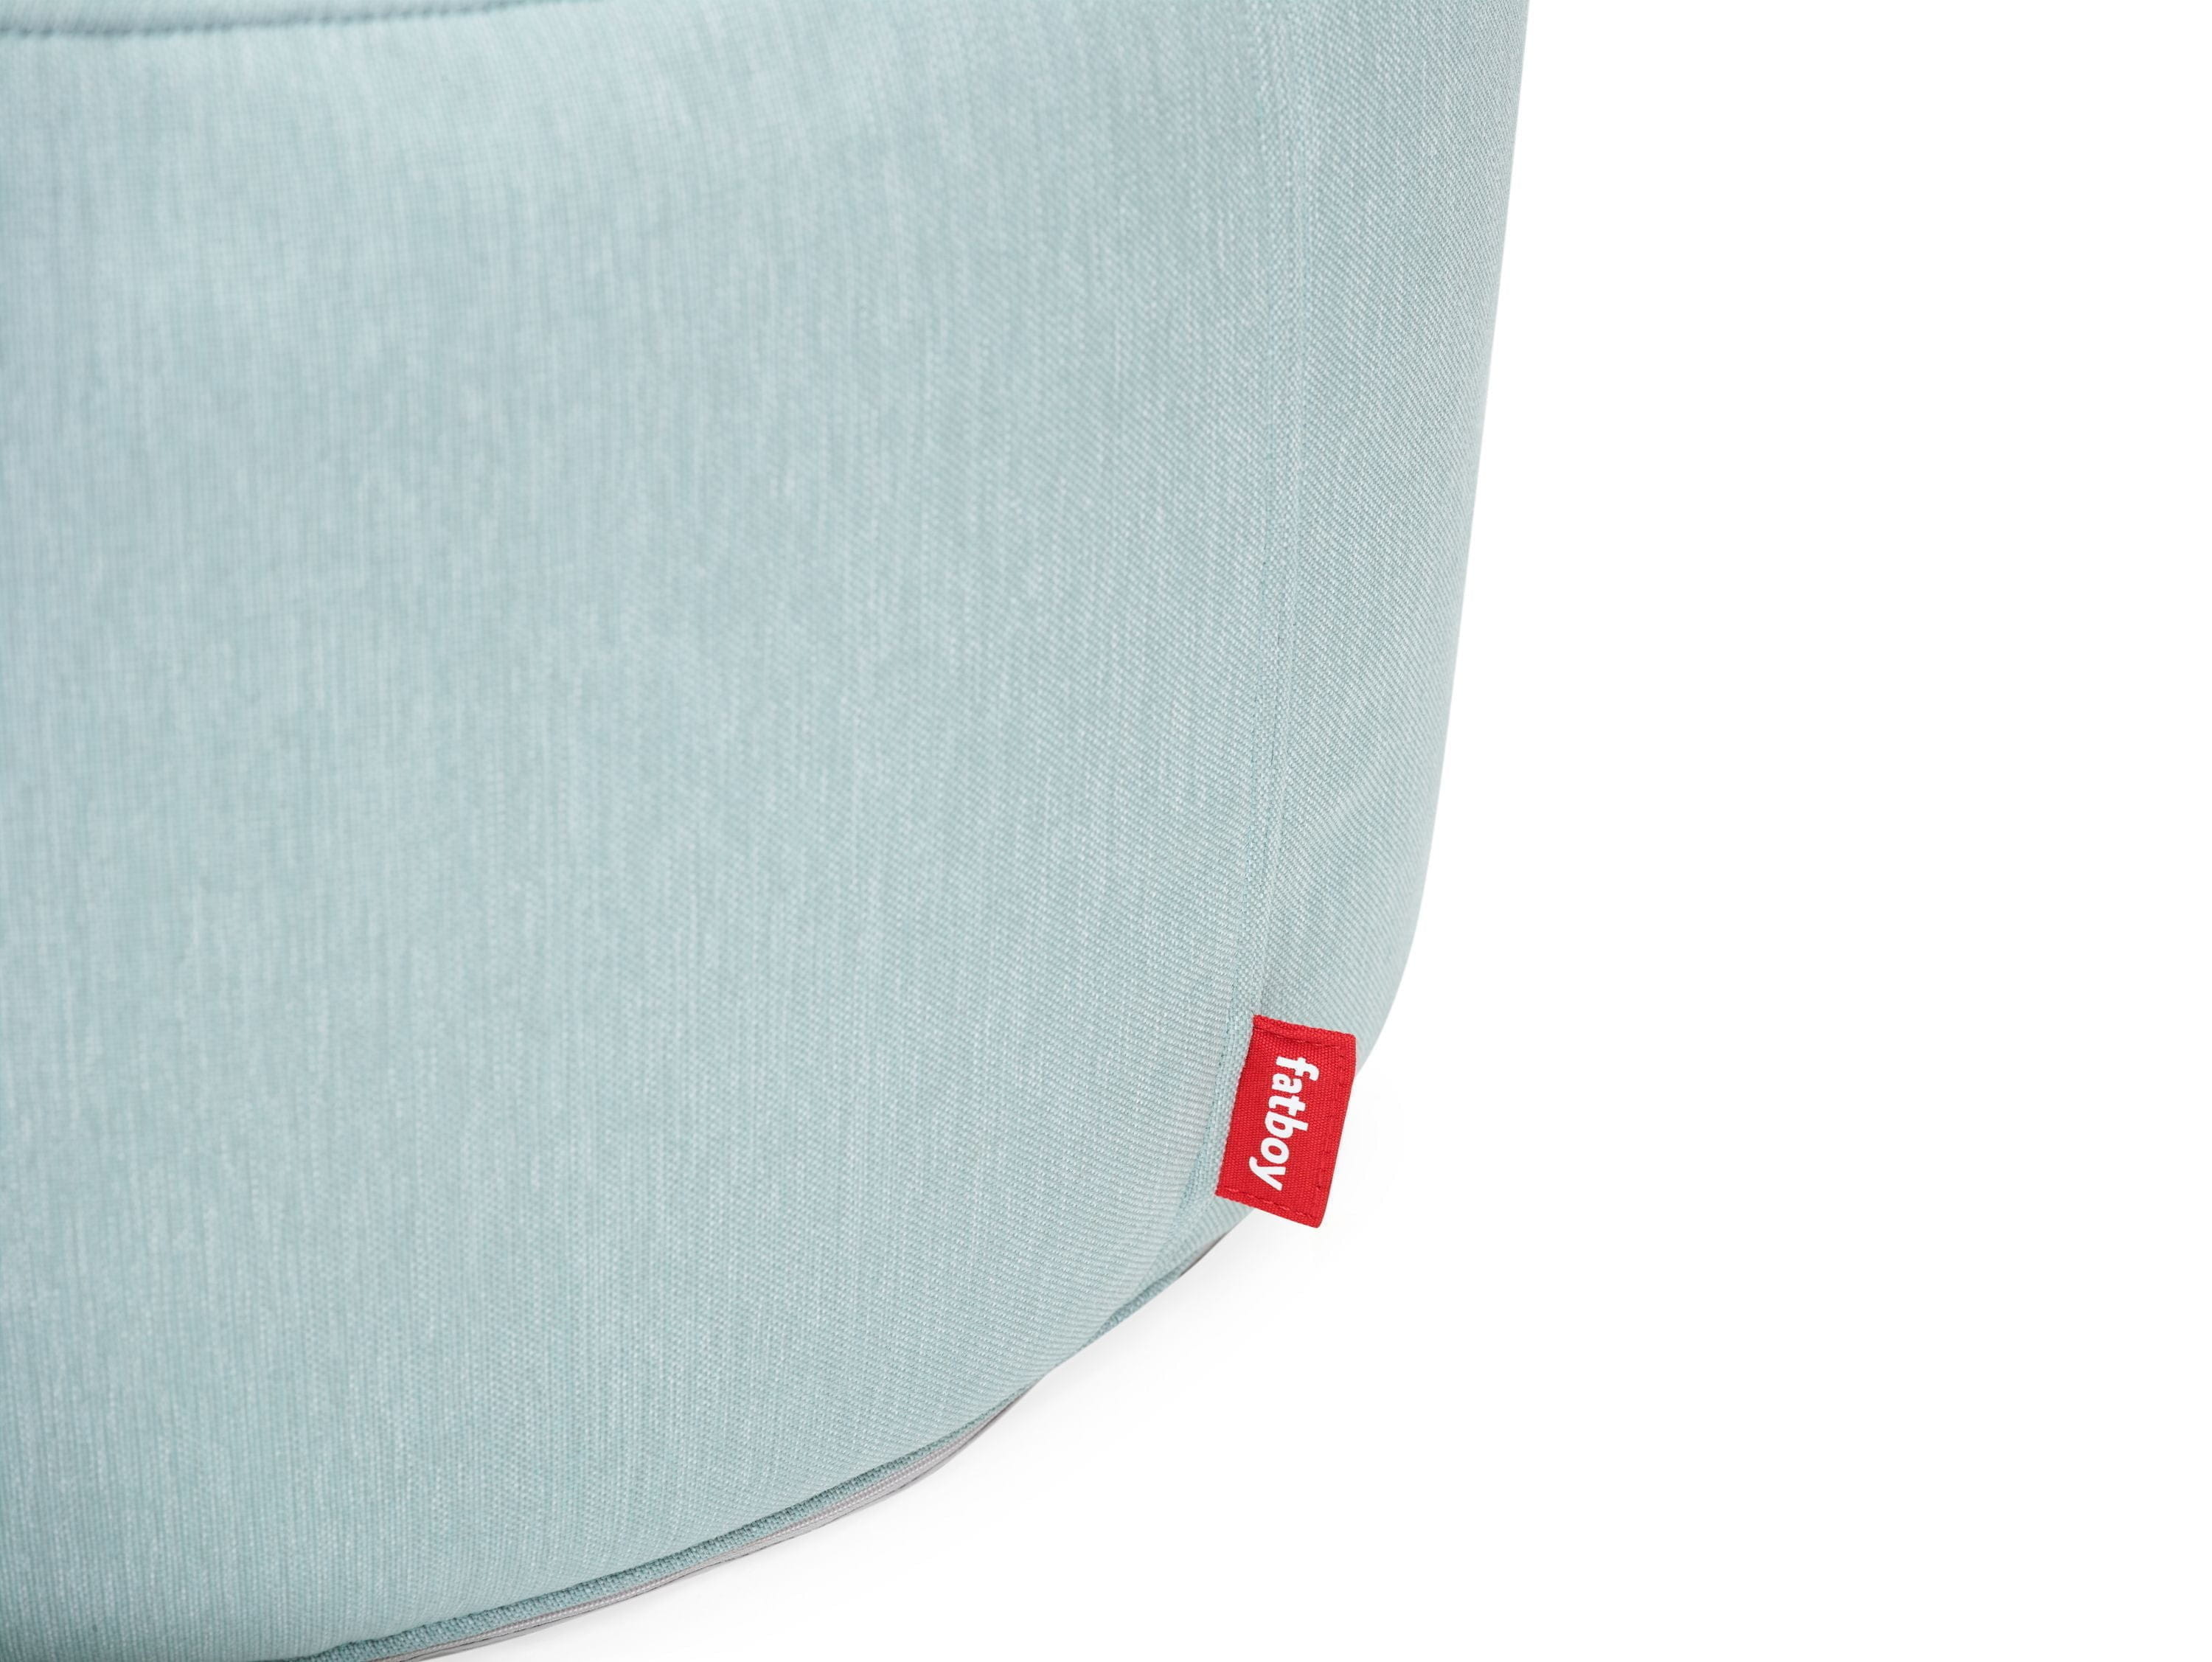 Fatboy Point Outdoor Large Stool, Seafoam